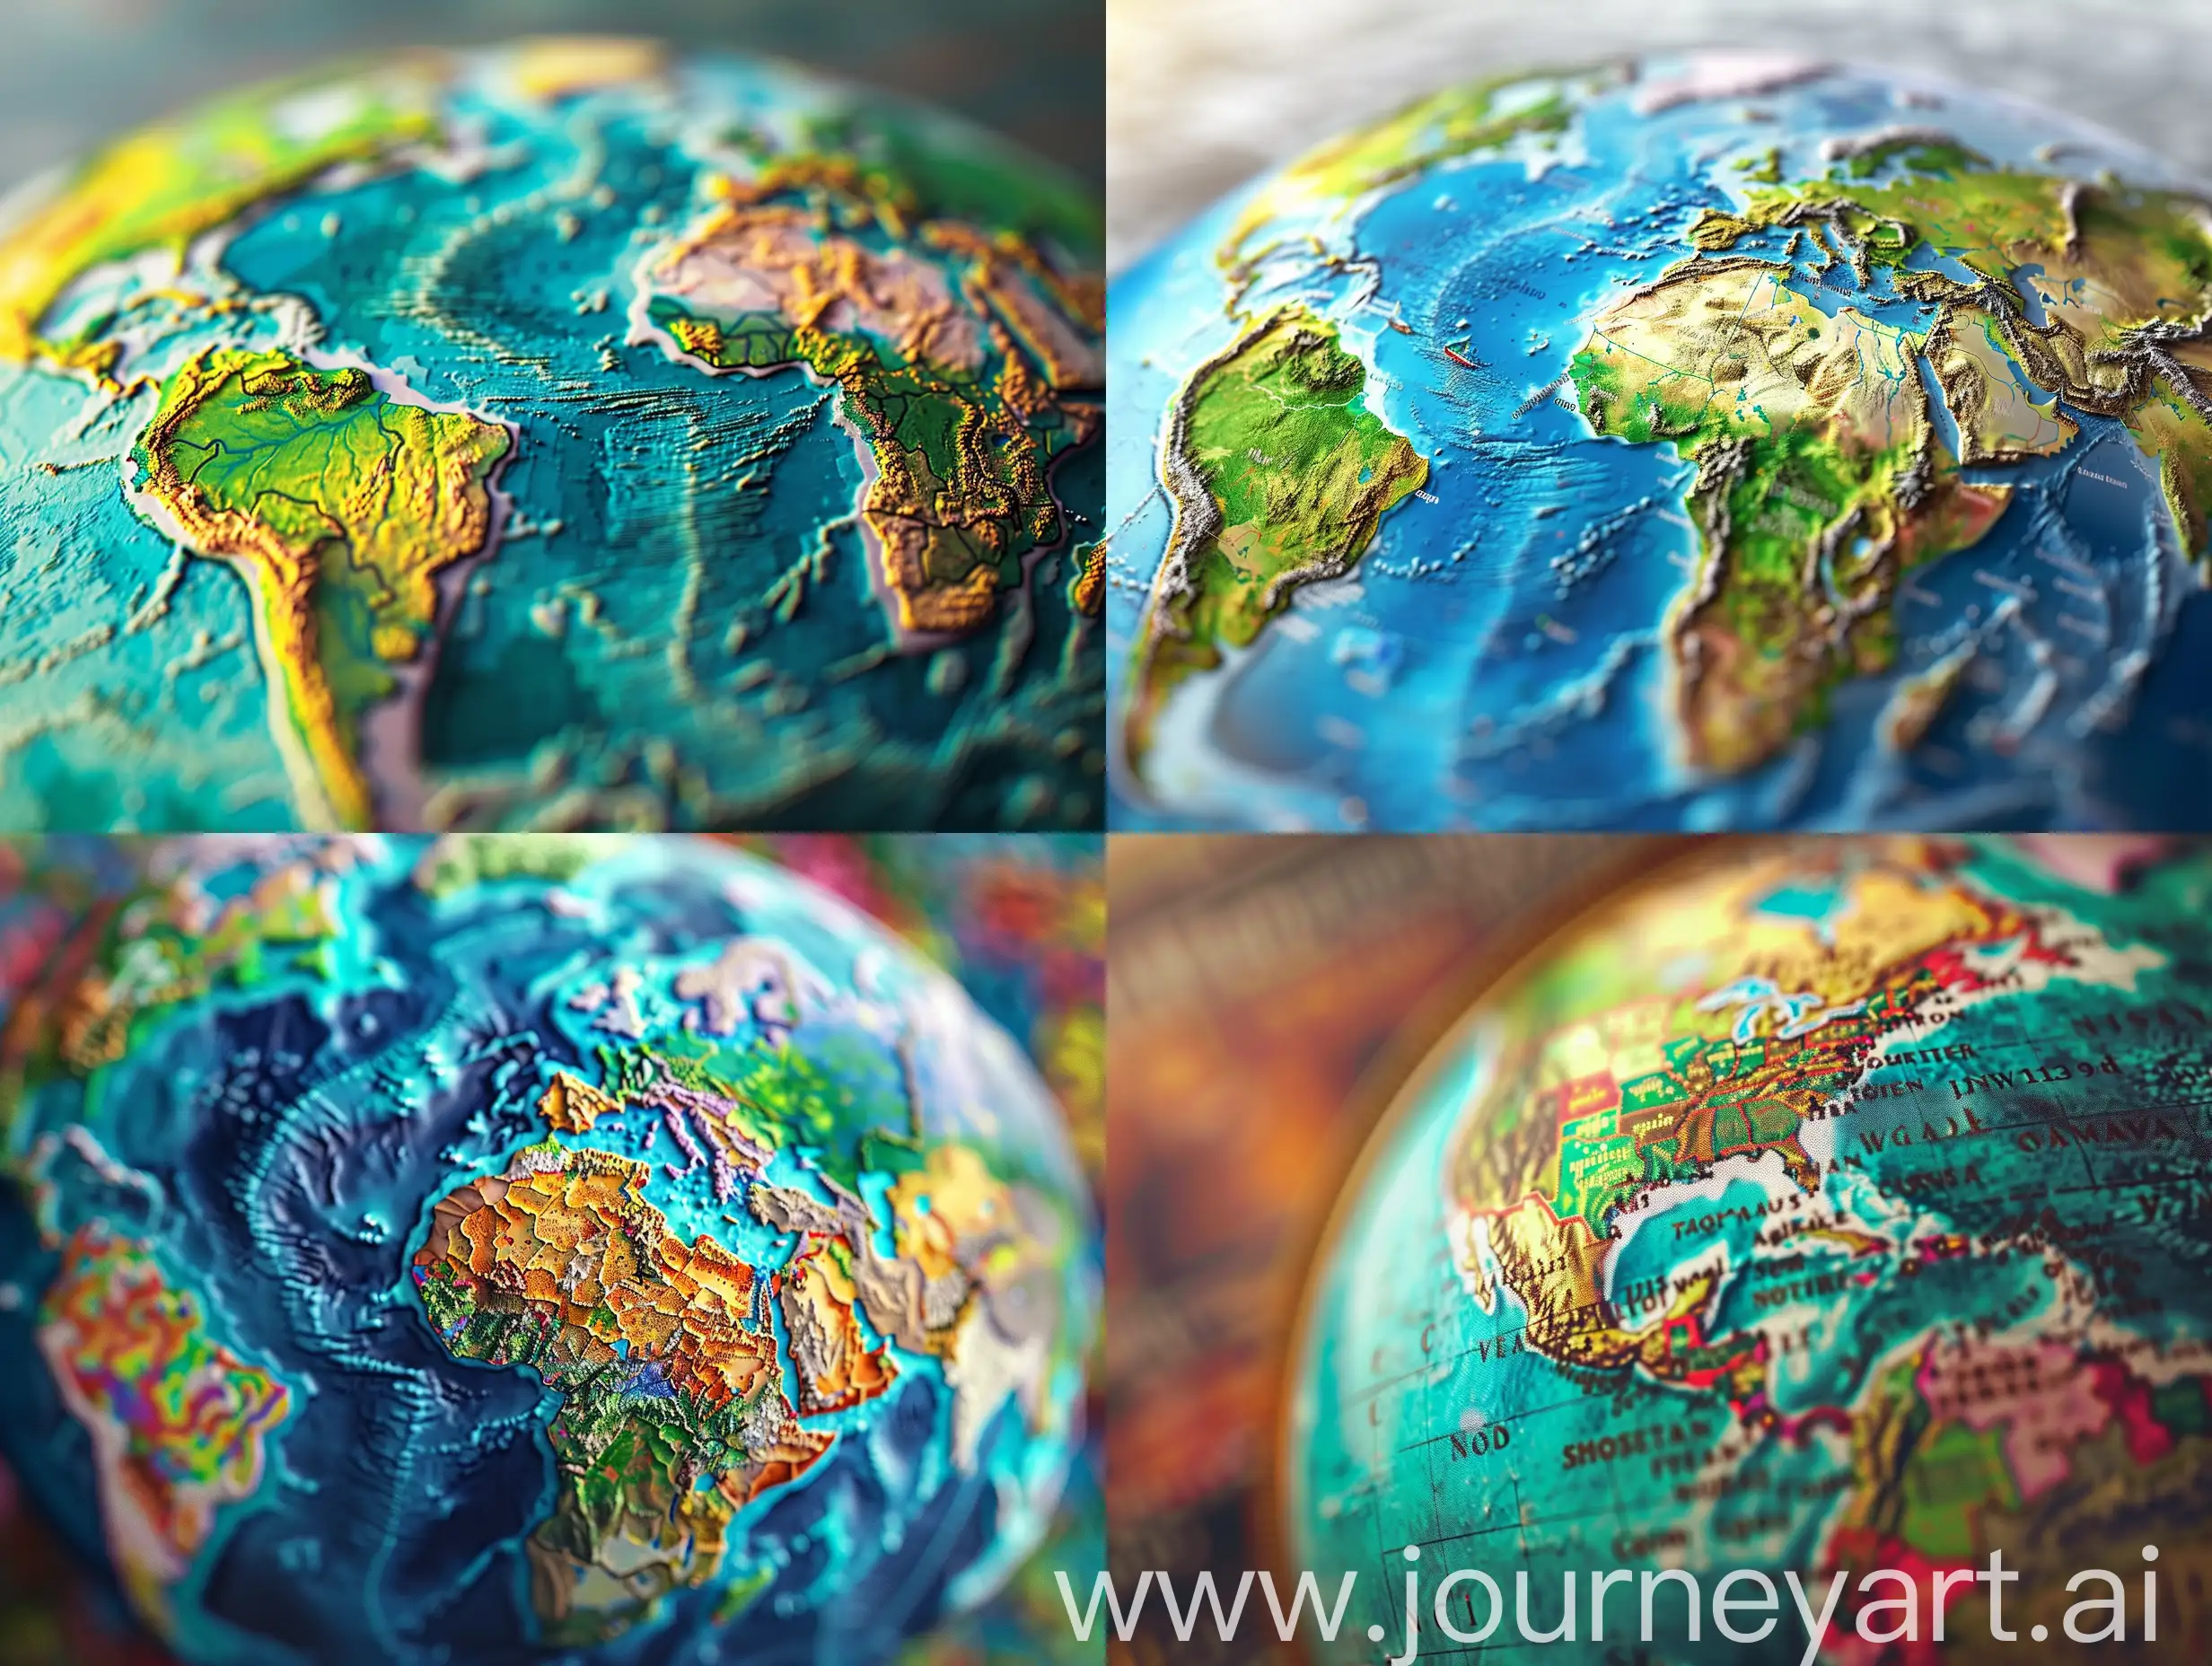 "Generate a high-resolution, realistic image depicting a global perspective in the aspect ratios of 16:9, 4:3, and 1:1. Ensure it includes eye-catching graphics such as a detailed world map or a globe with vibrant colors to engage the audience."